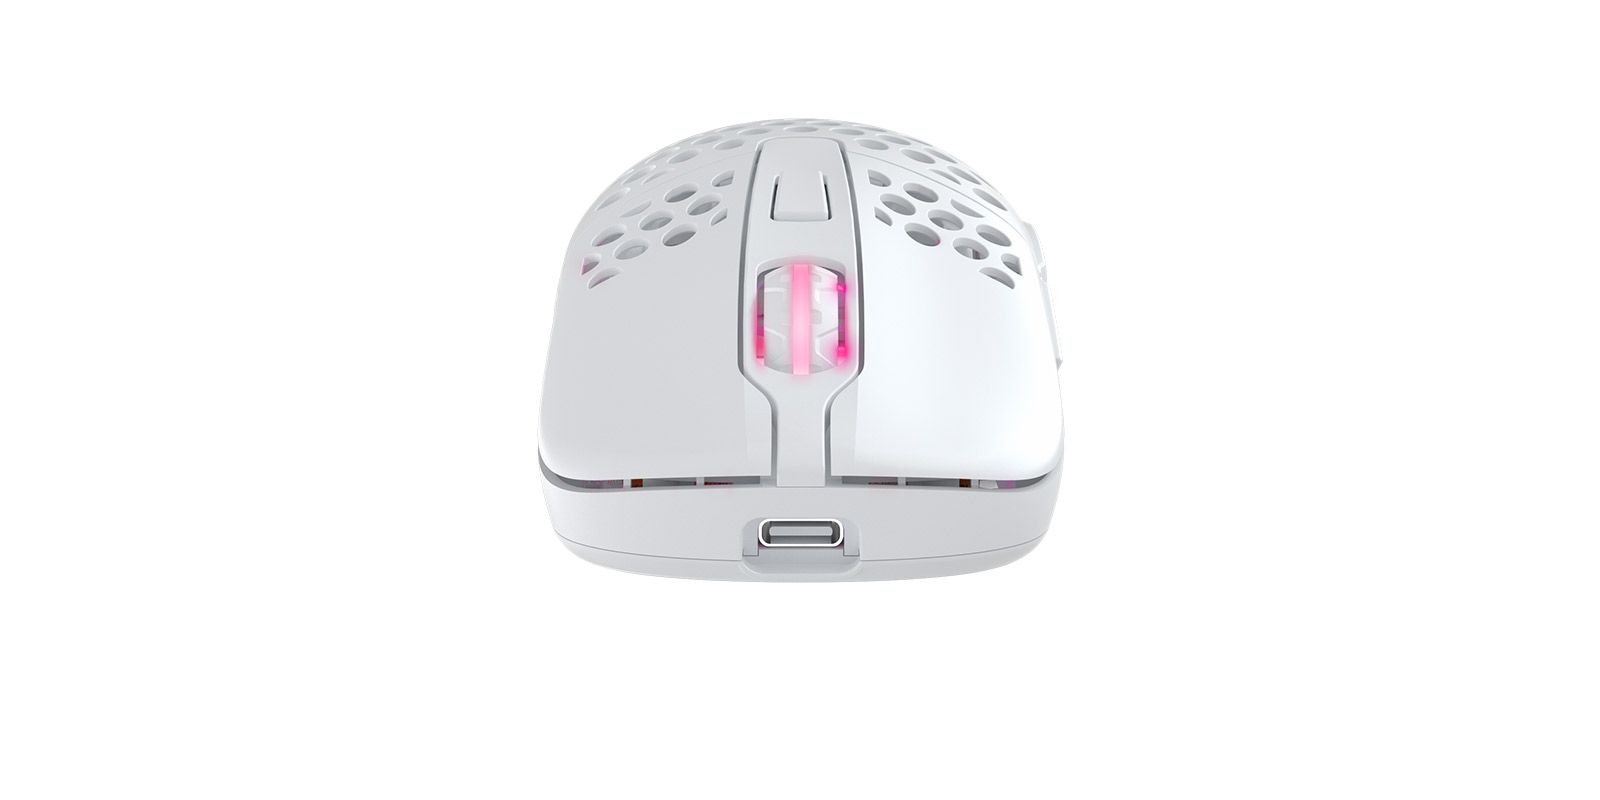 M42-Wireless-White-Gaming-Mouse_gallery03.jpg